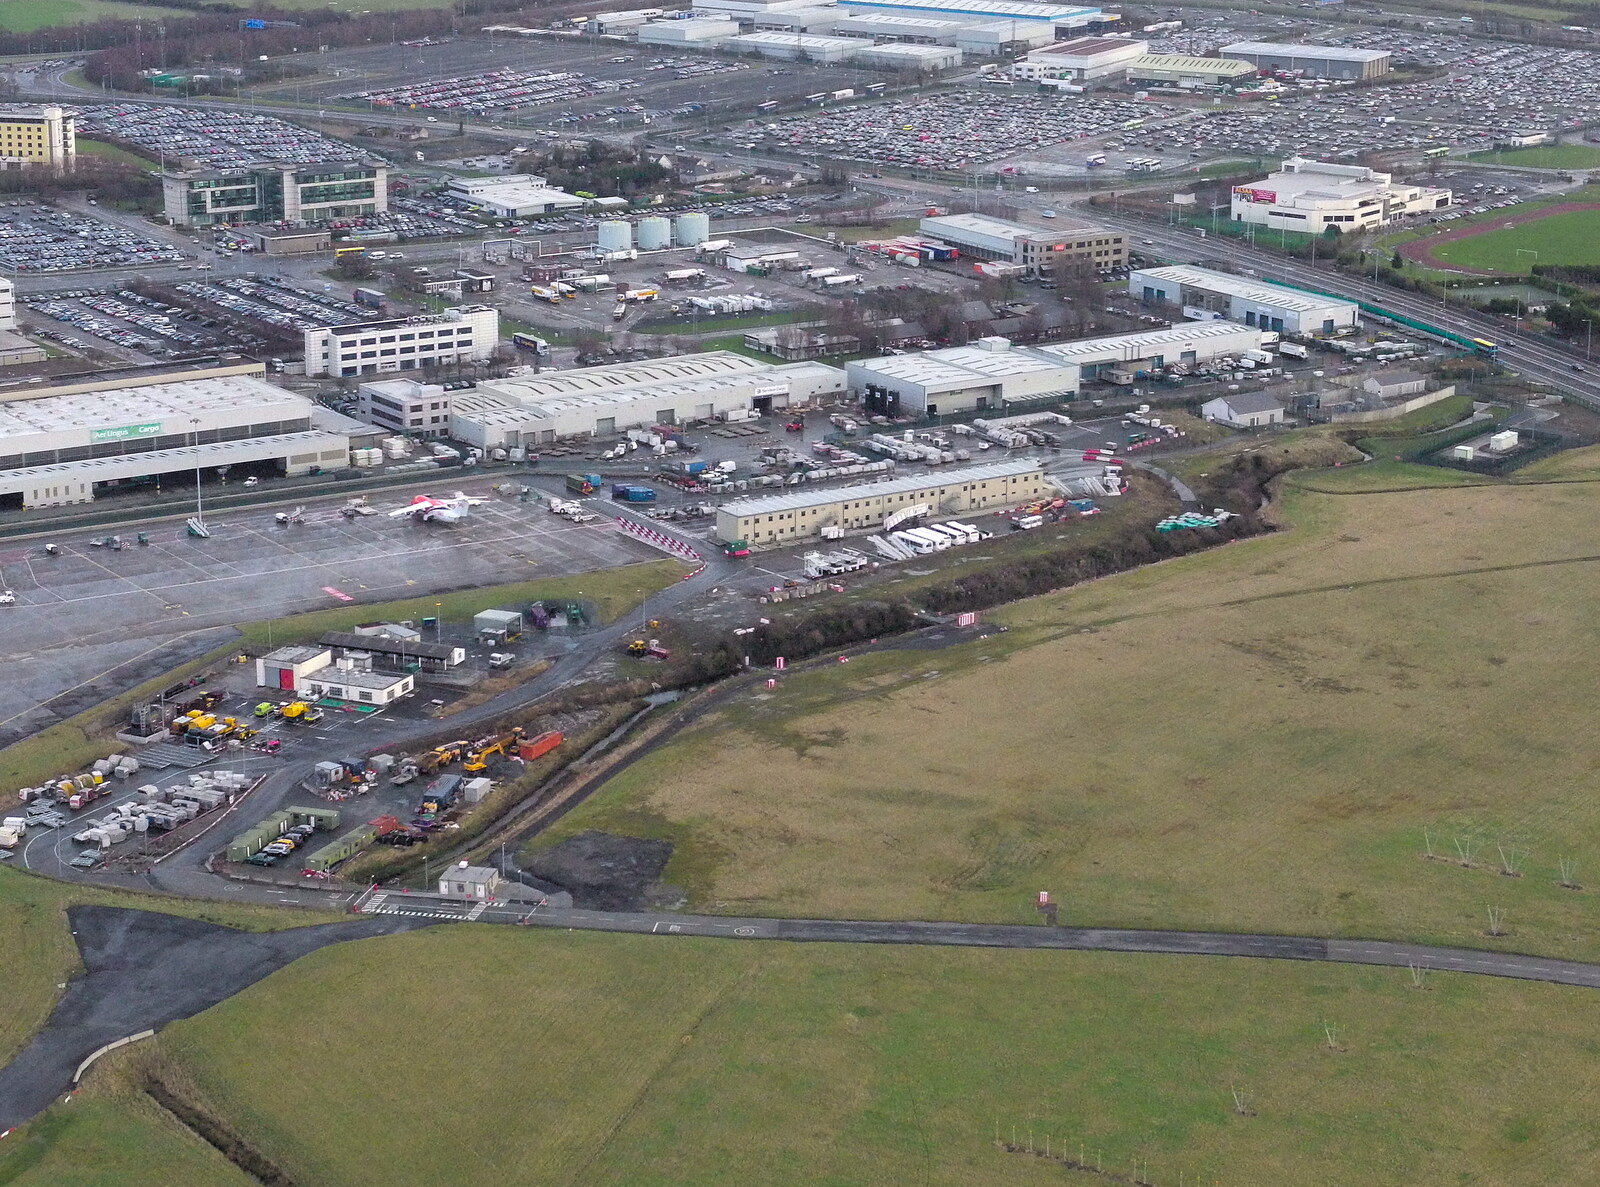 The industrial area near the airport from Dun Laoghaire and an Electrical Disaster, Monkstown, County Dublin, Ireland - 4th January 2014